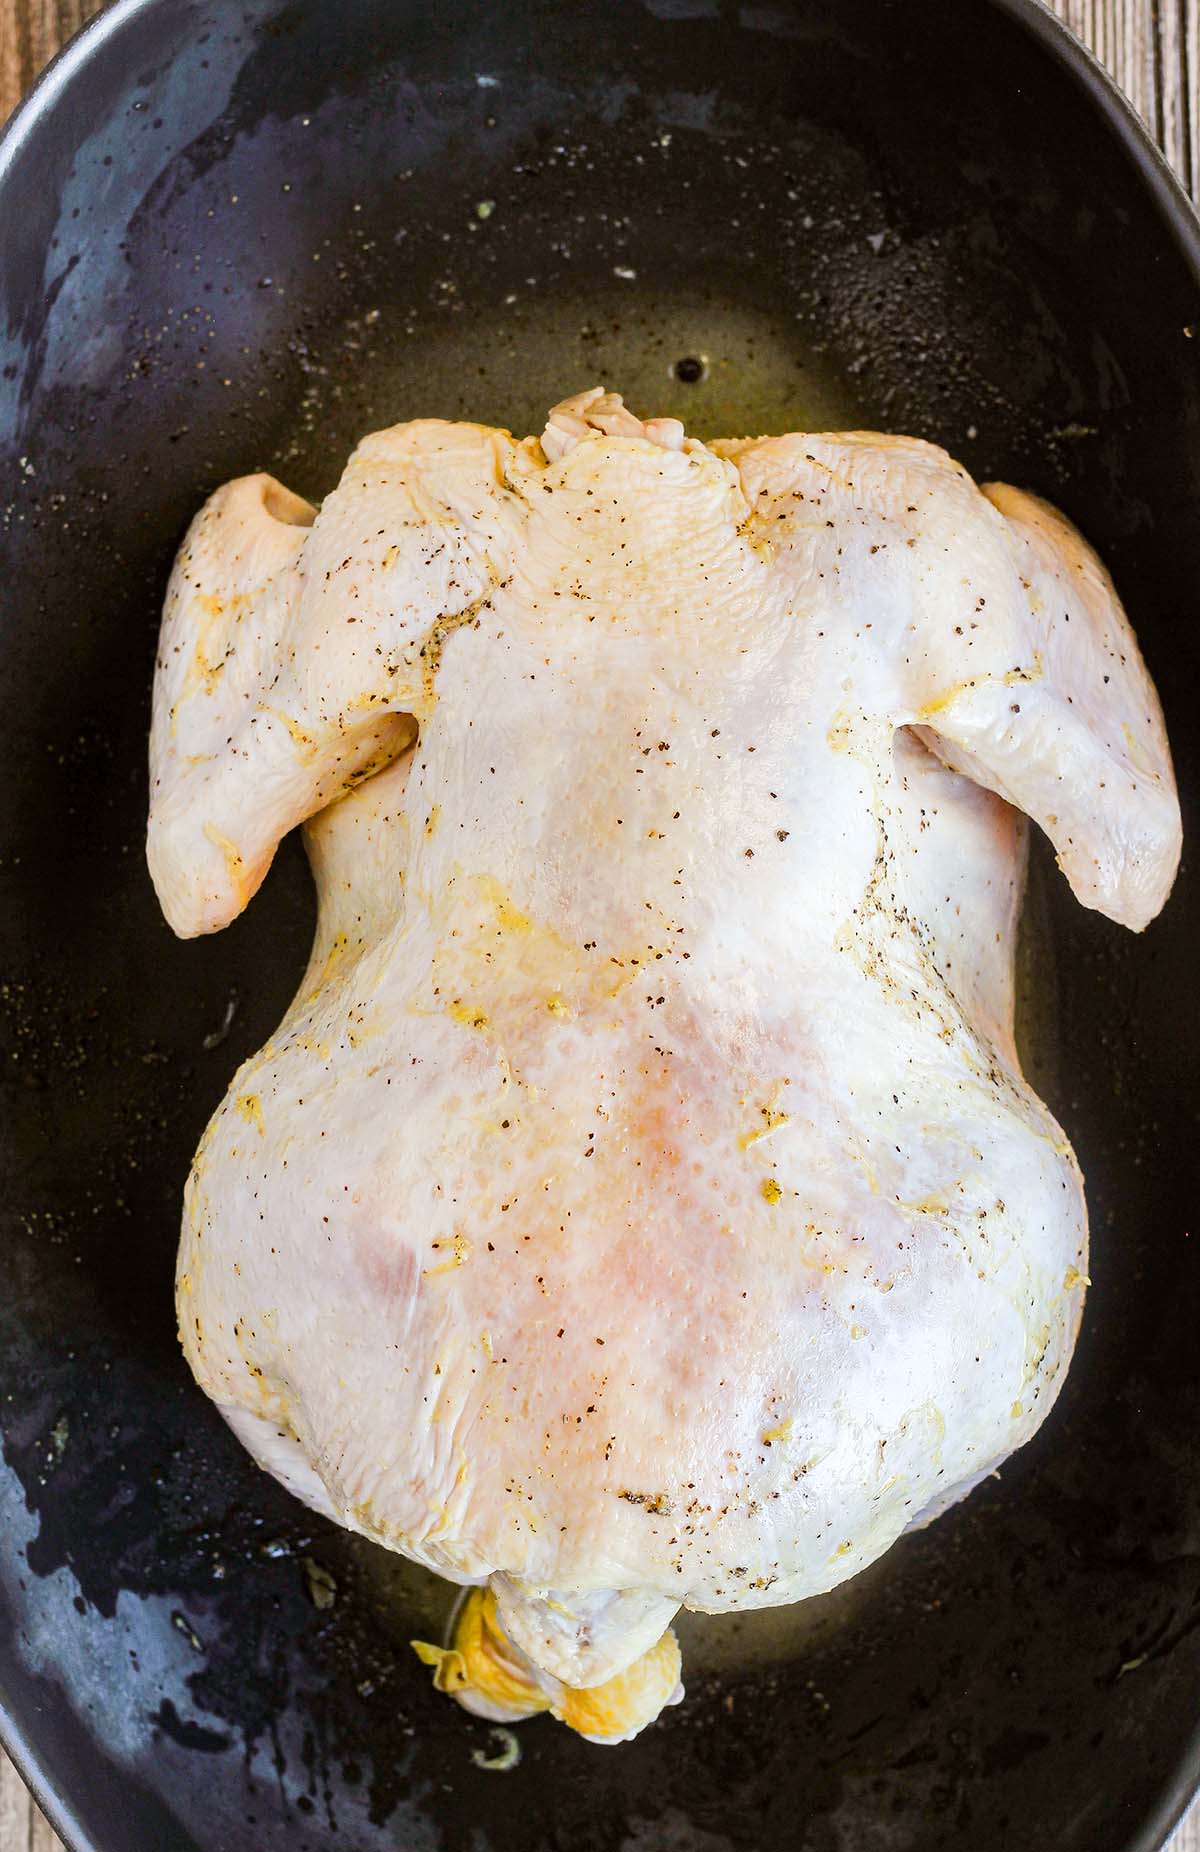 Whole chicken in a roasting pan prior to baking